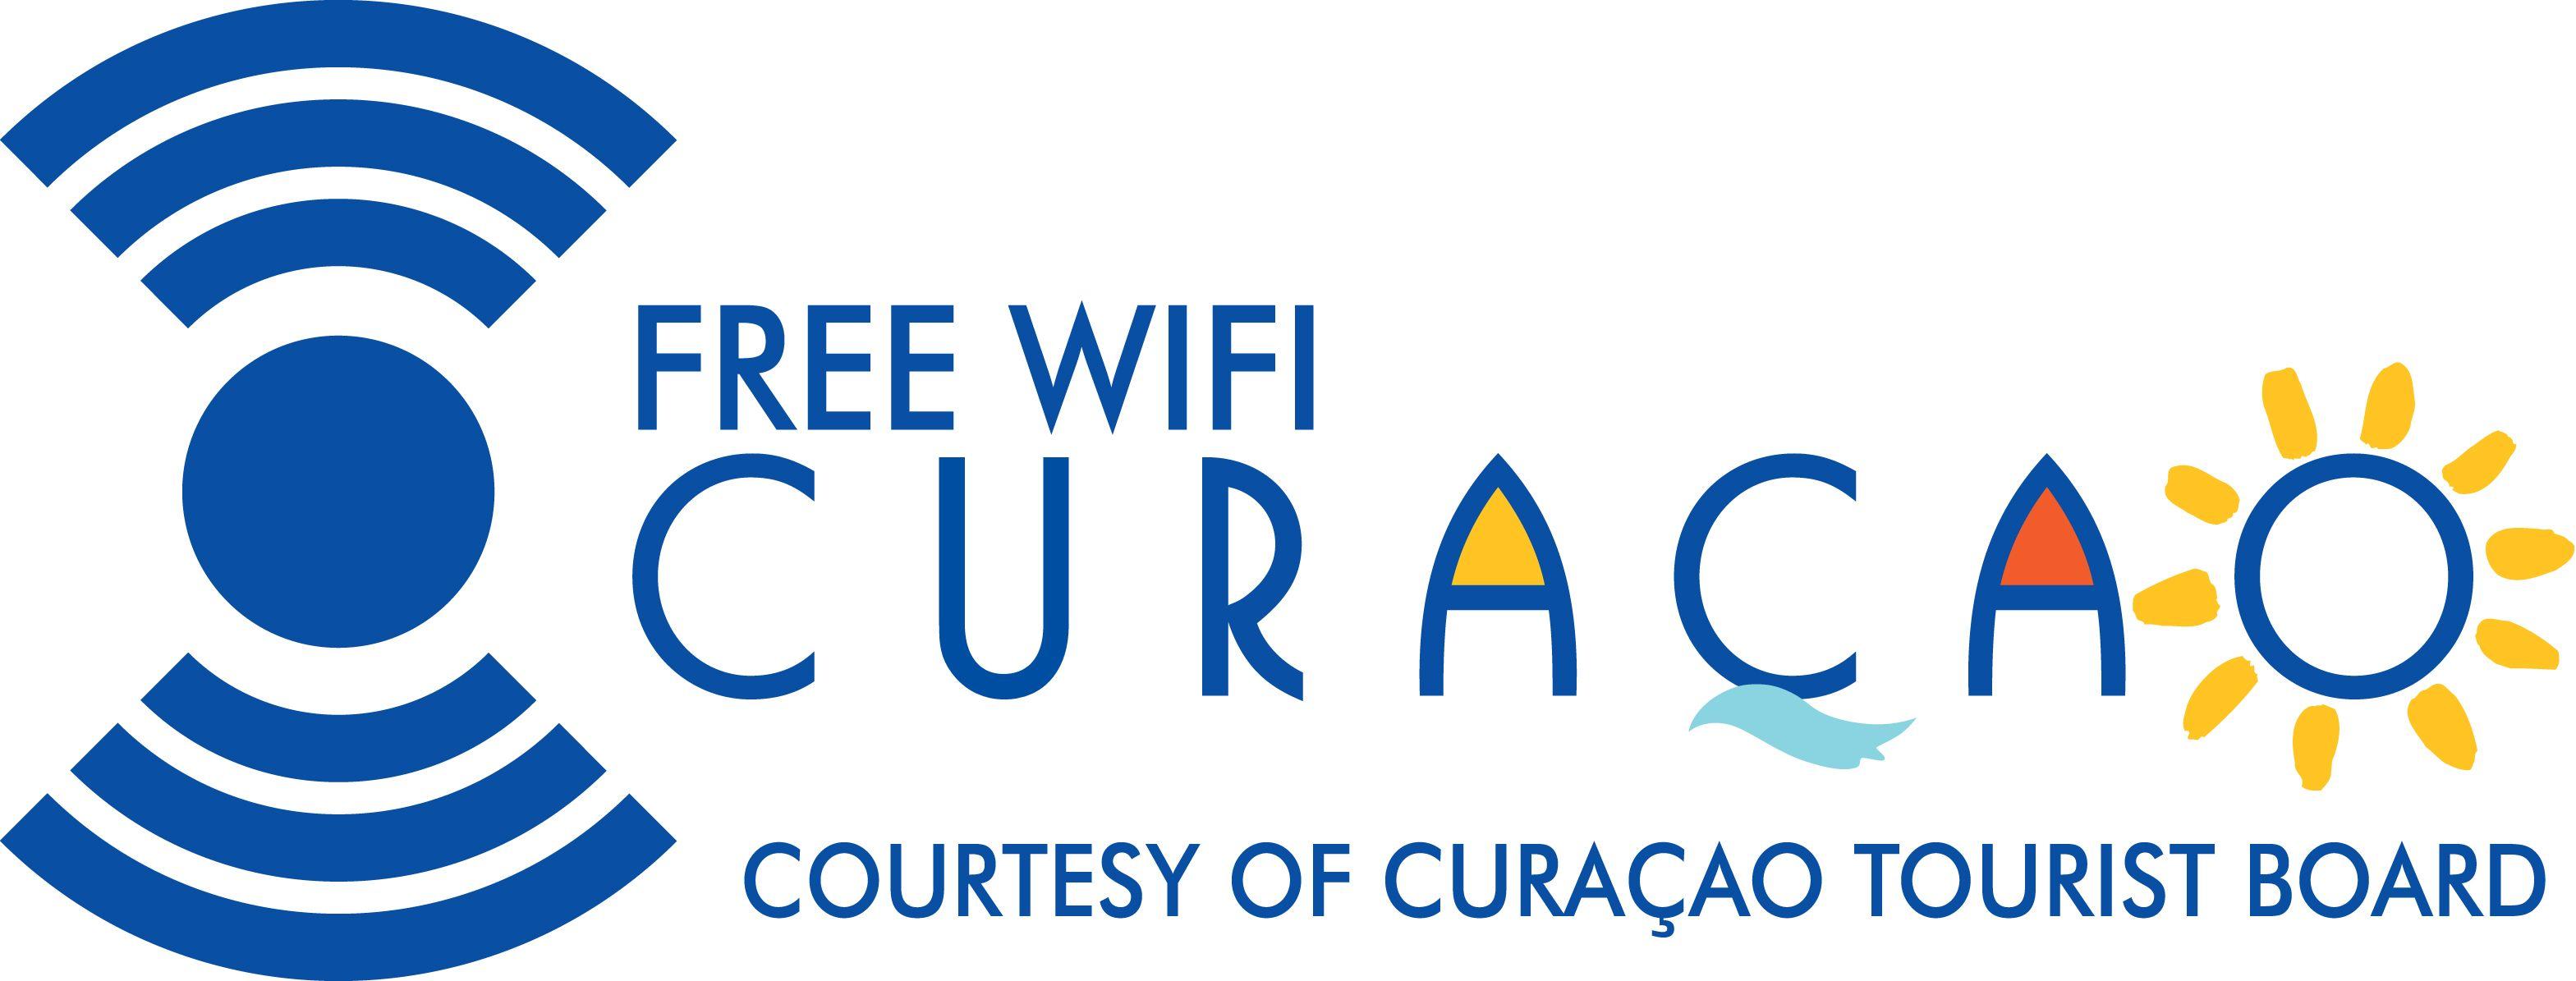 Curacao Logo - Free internet in downtown Willemstad - Curaçao Chronicle